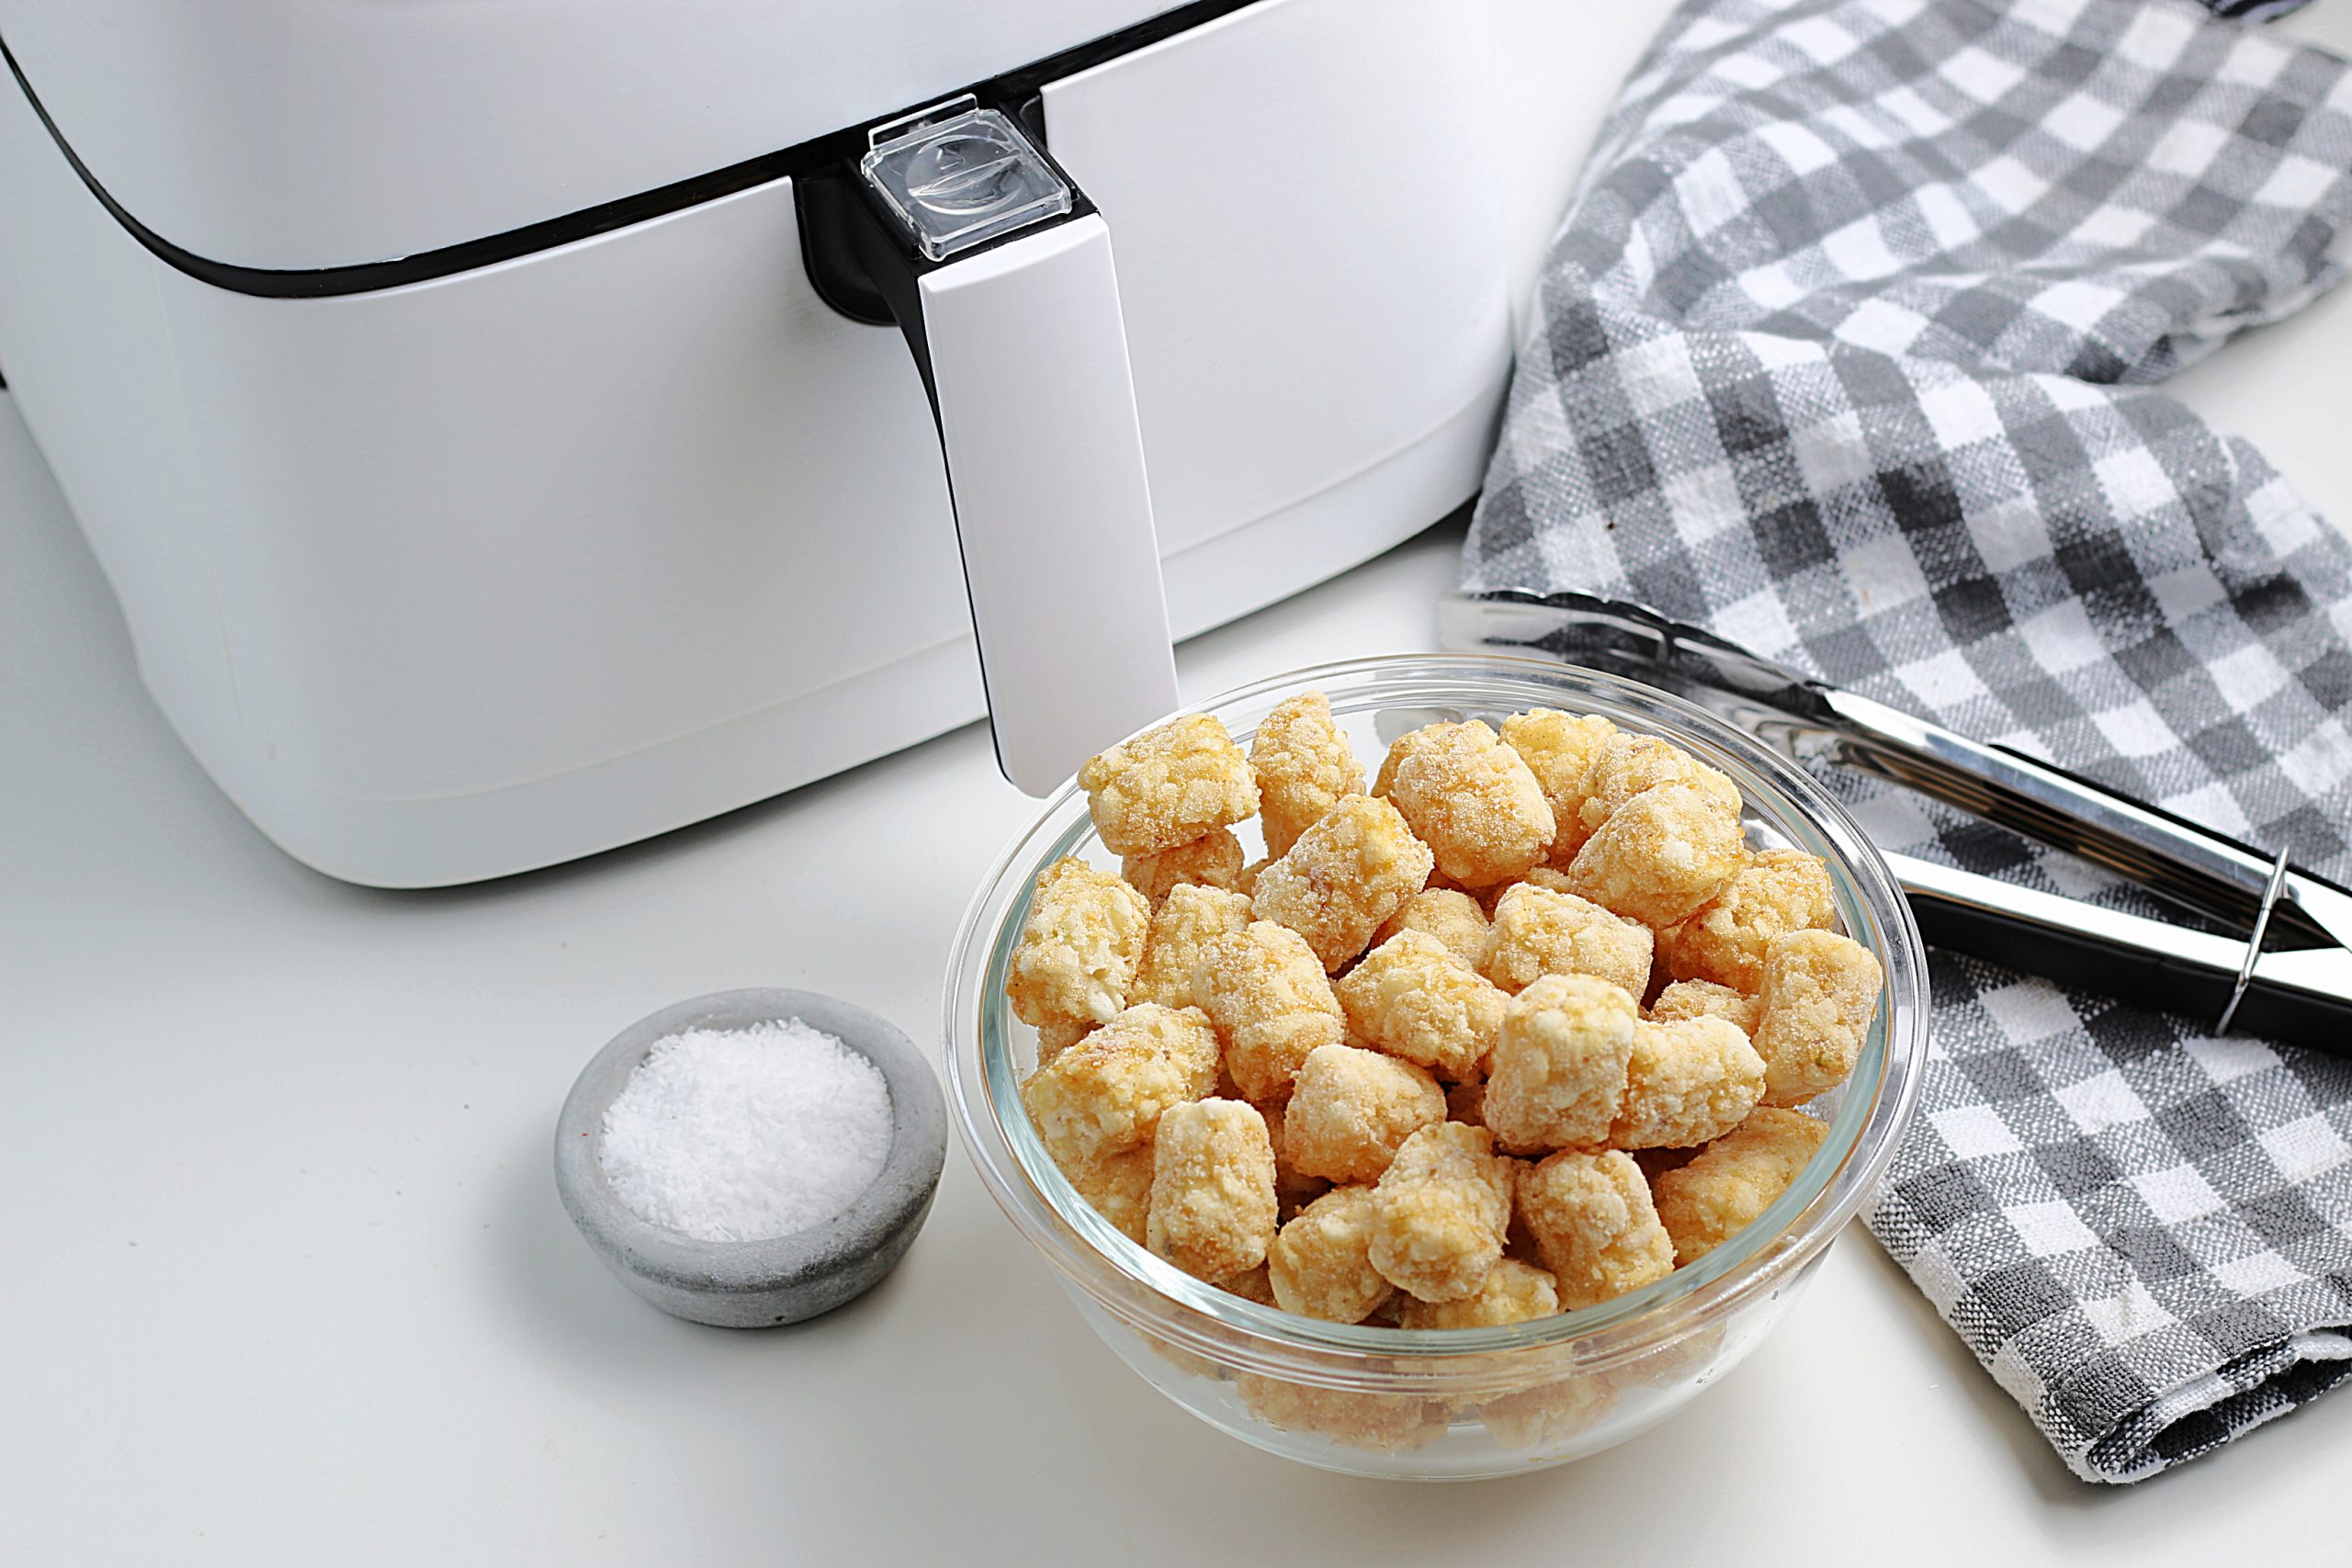 Ingredients for air fryer tator tots - frozen tator tots, cooking spray and salt. 